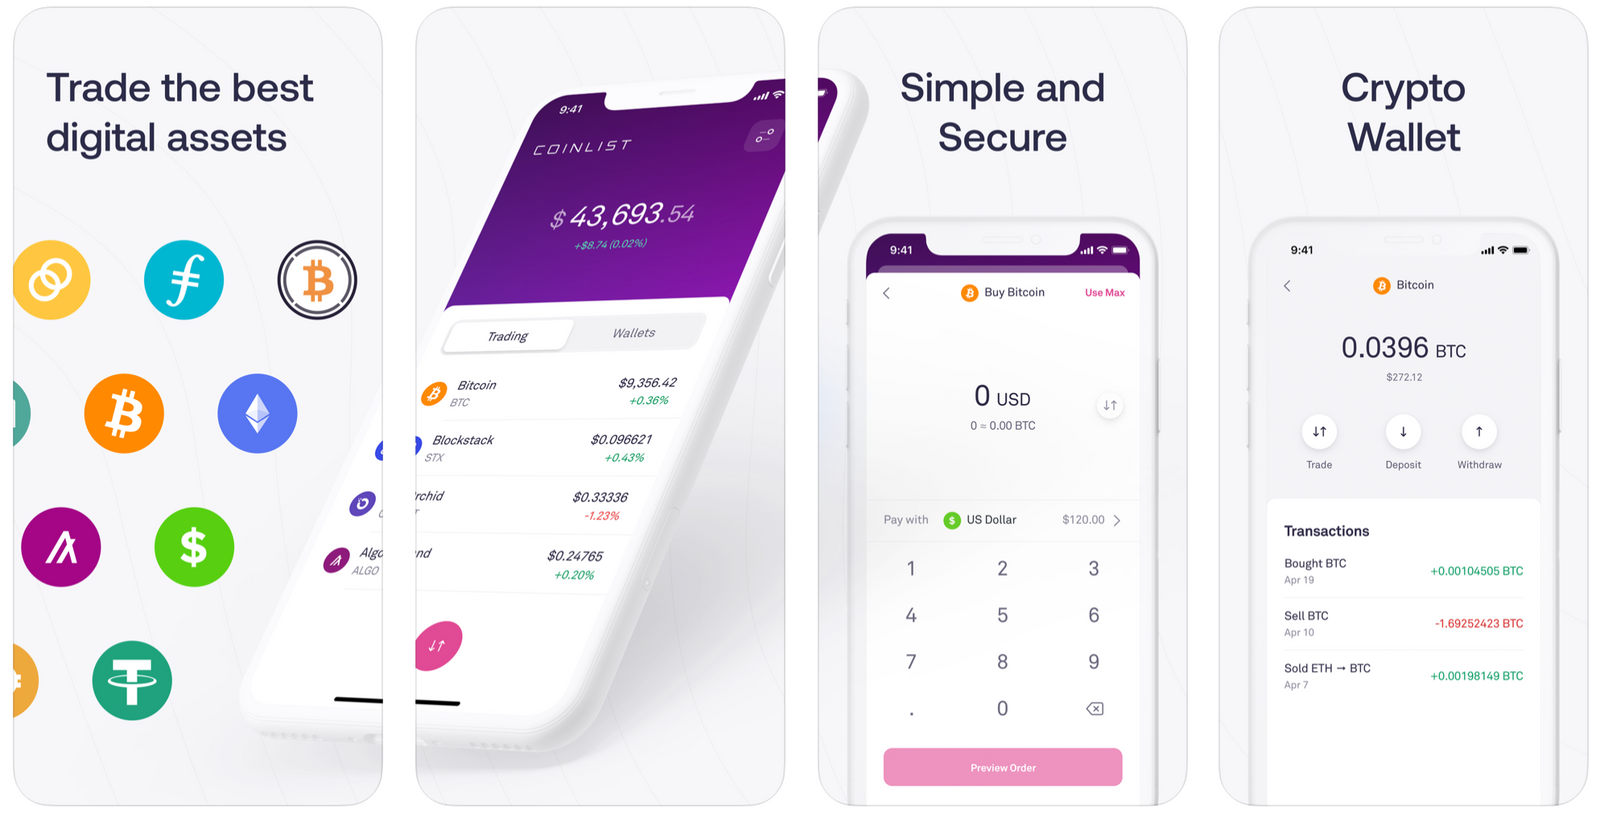 Introducing the CoinList mobile app